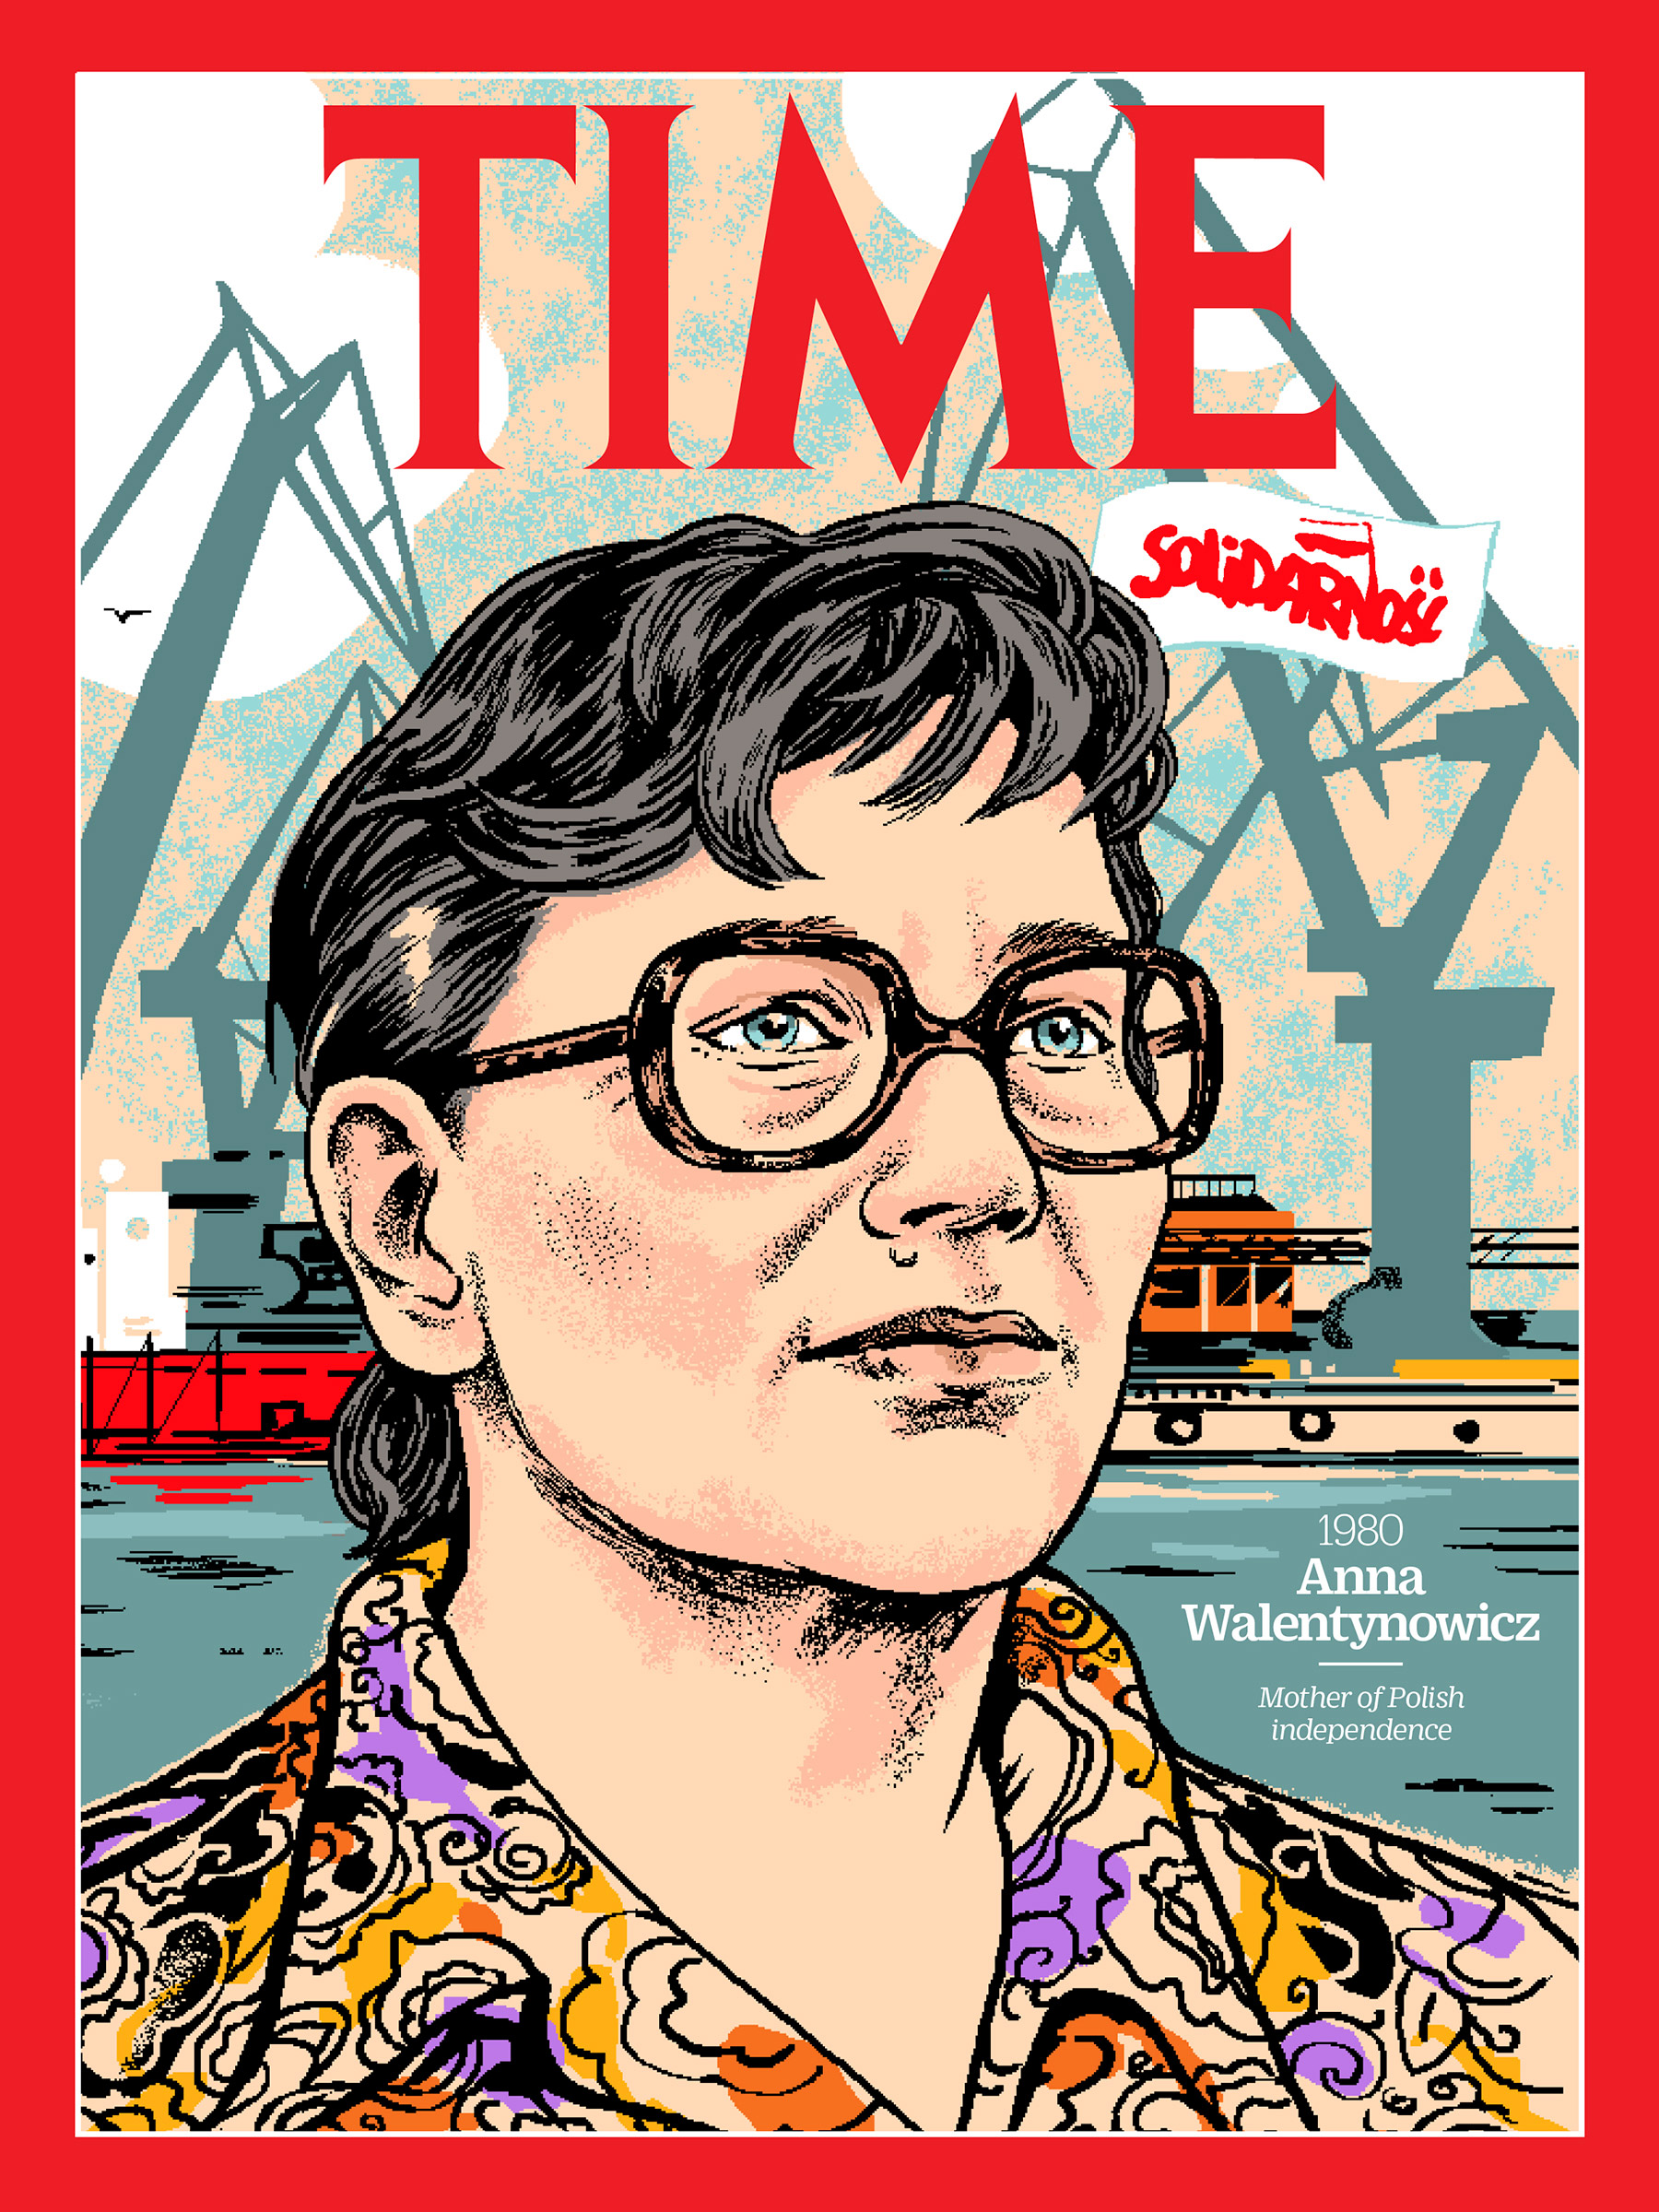 <a href="https://fineartamerica.com/featured/anna-walentynowicz-1980-time.html"><strong>Buy the cover art→</strong></a> (Illustration by Agata Nowicka for TIME)